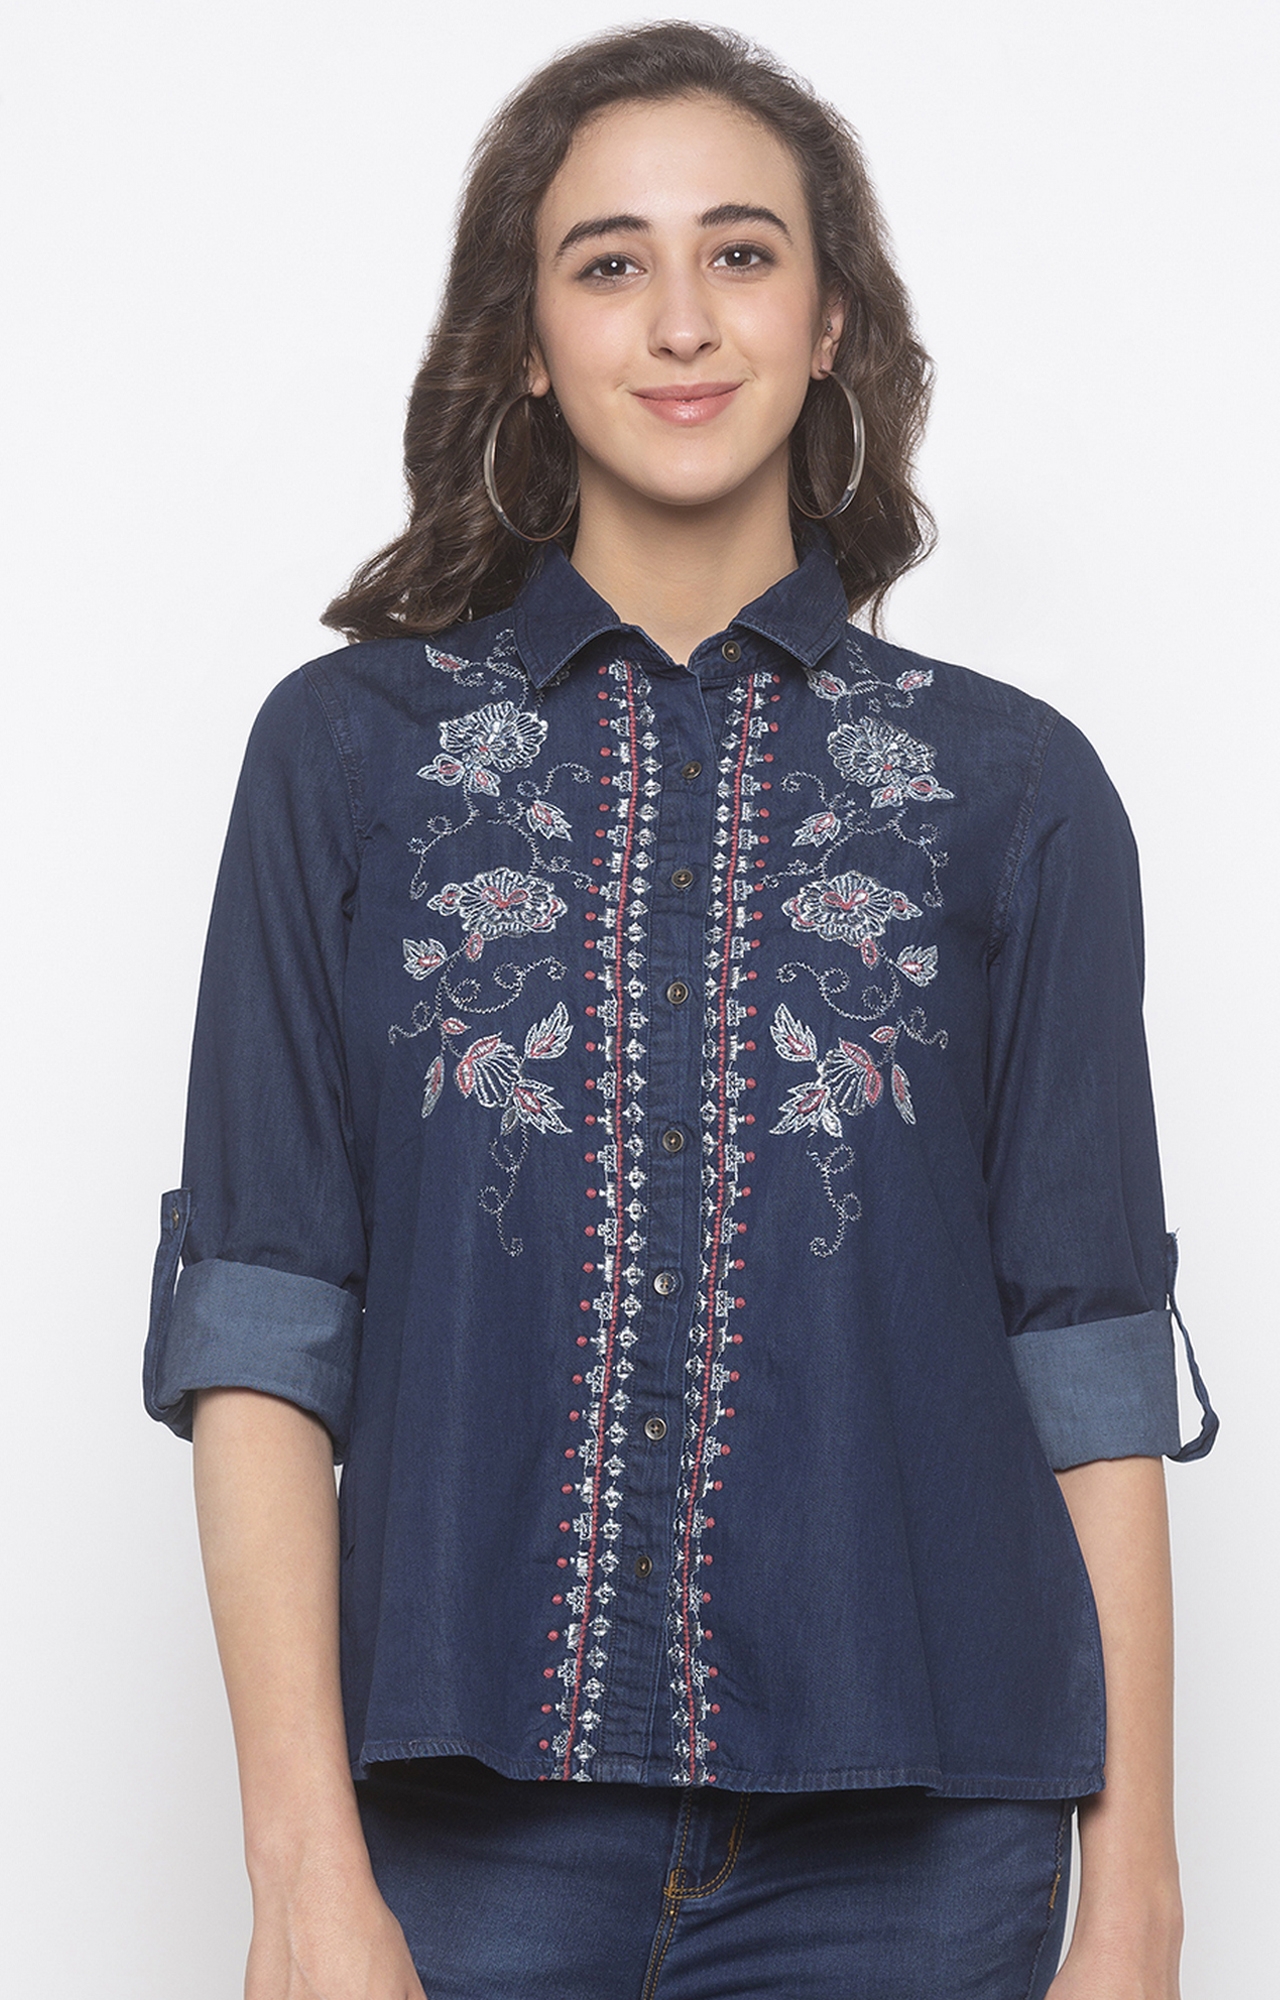 globus | Blue Embroidered Blouson Top 0